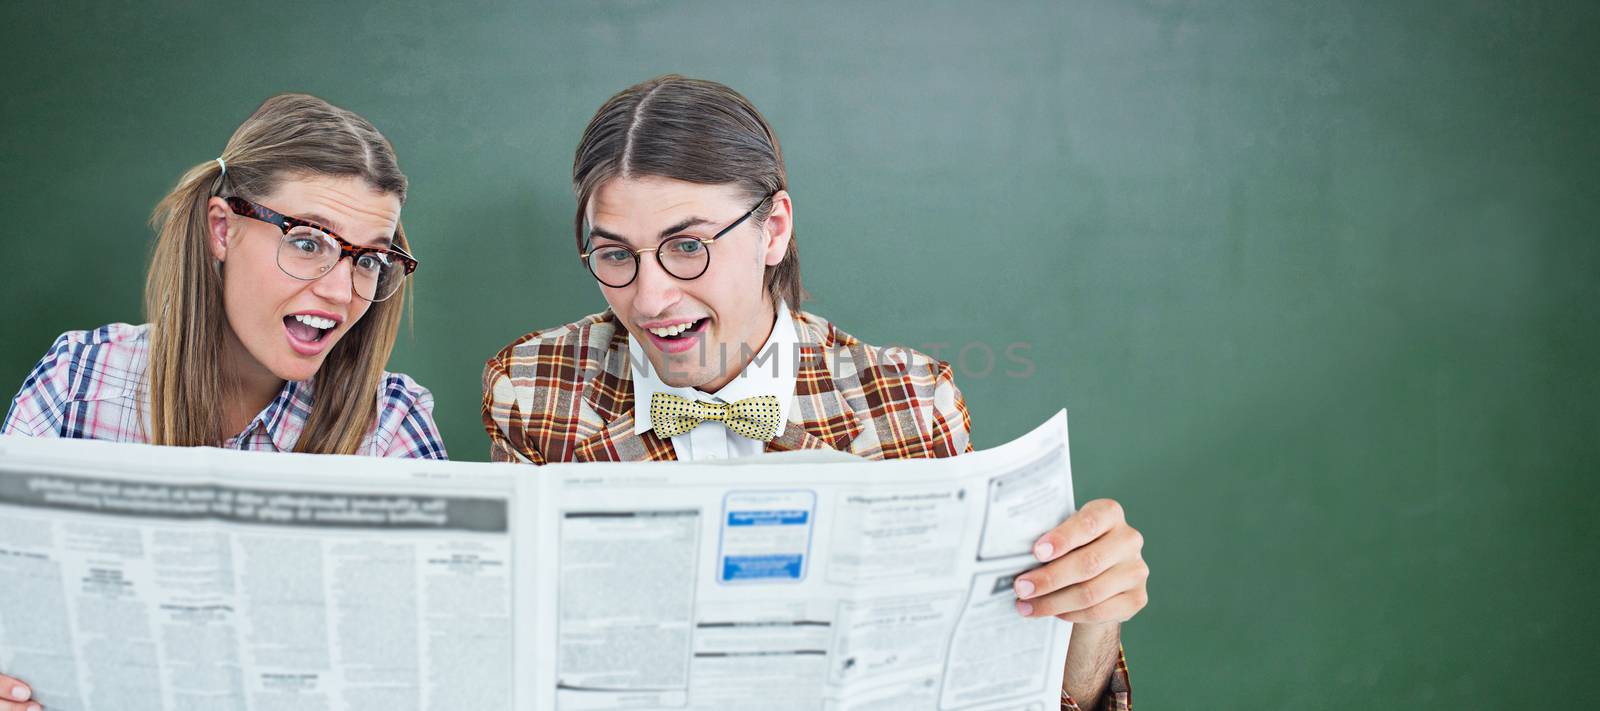 Geeky hipsters reading the newspaper against green chalkboard